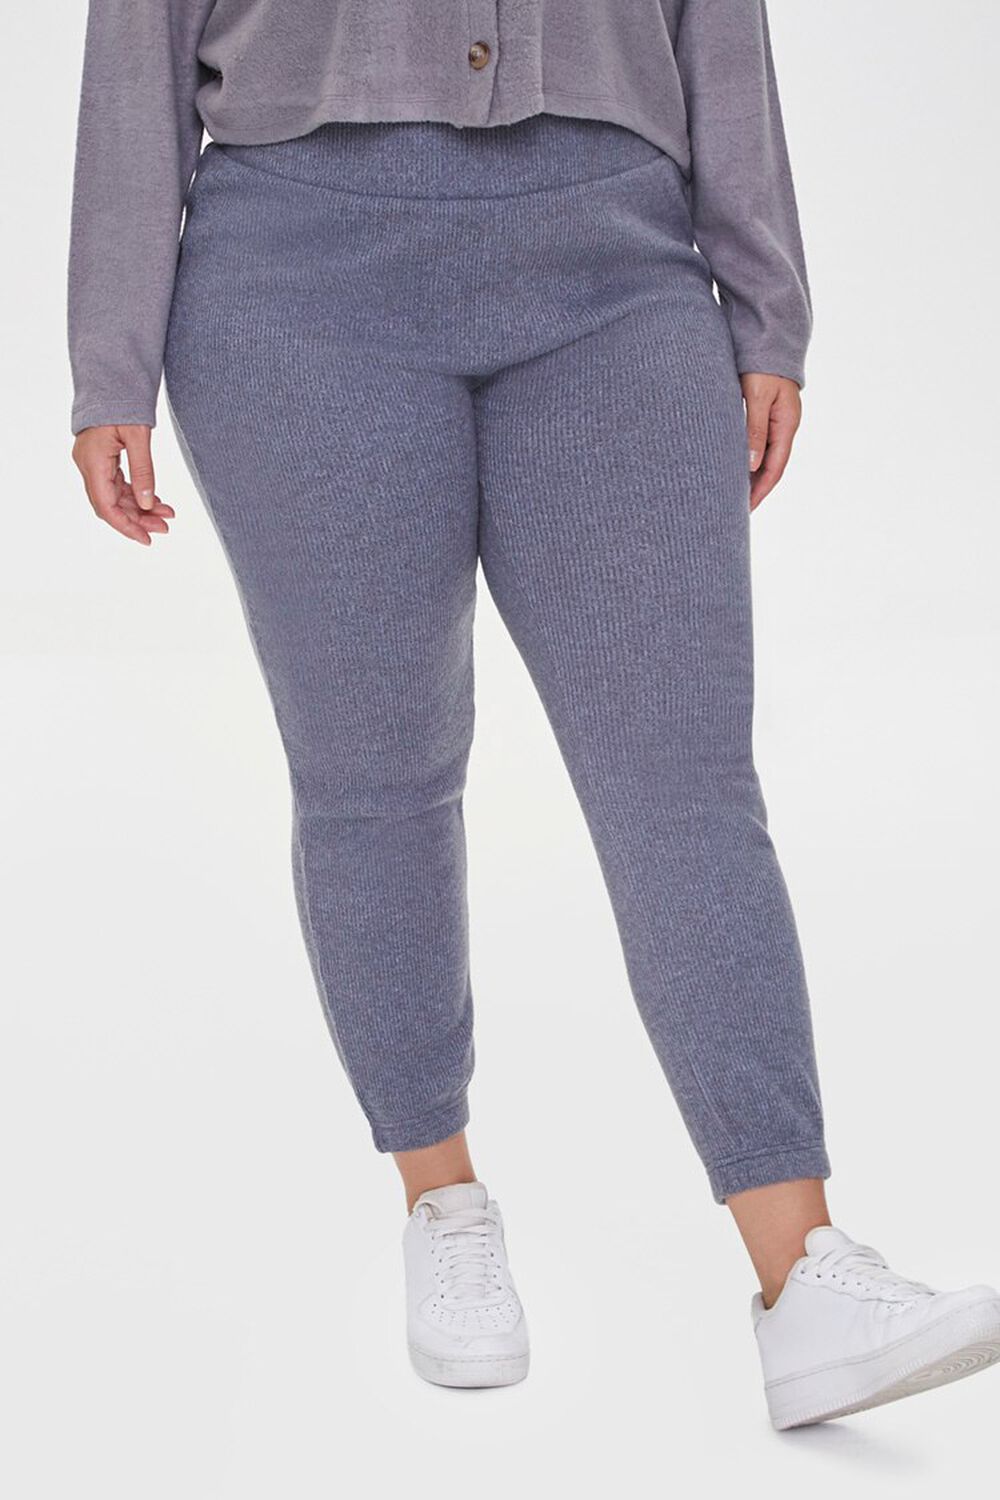 CHARCOAL Plus Size Ribbed Knit Joggers, image 2